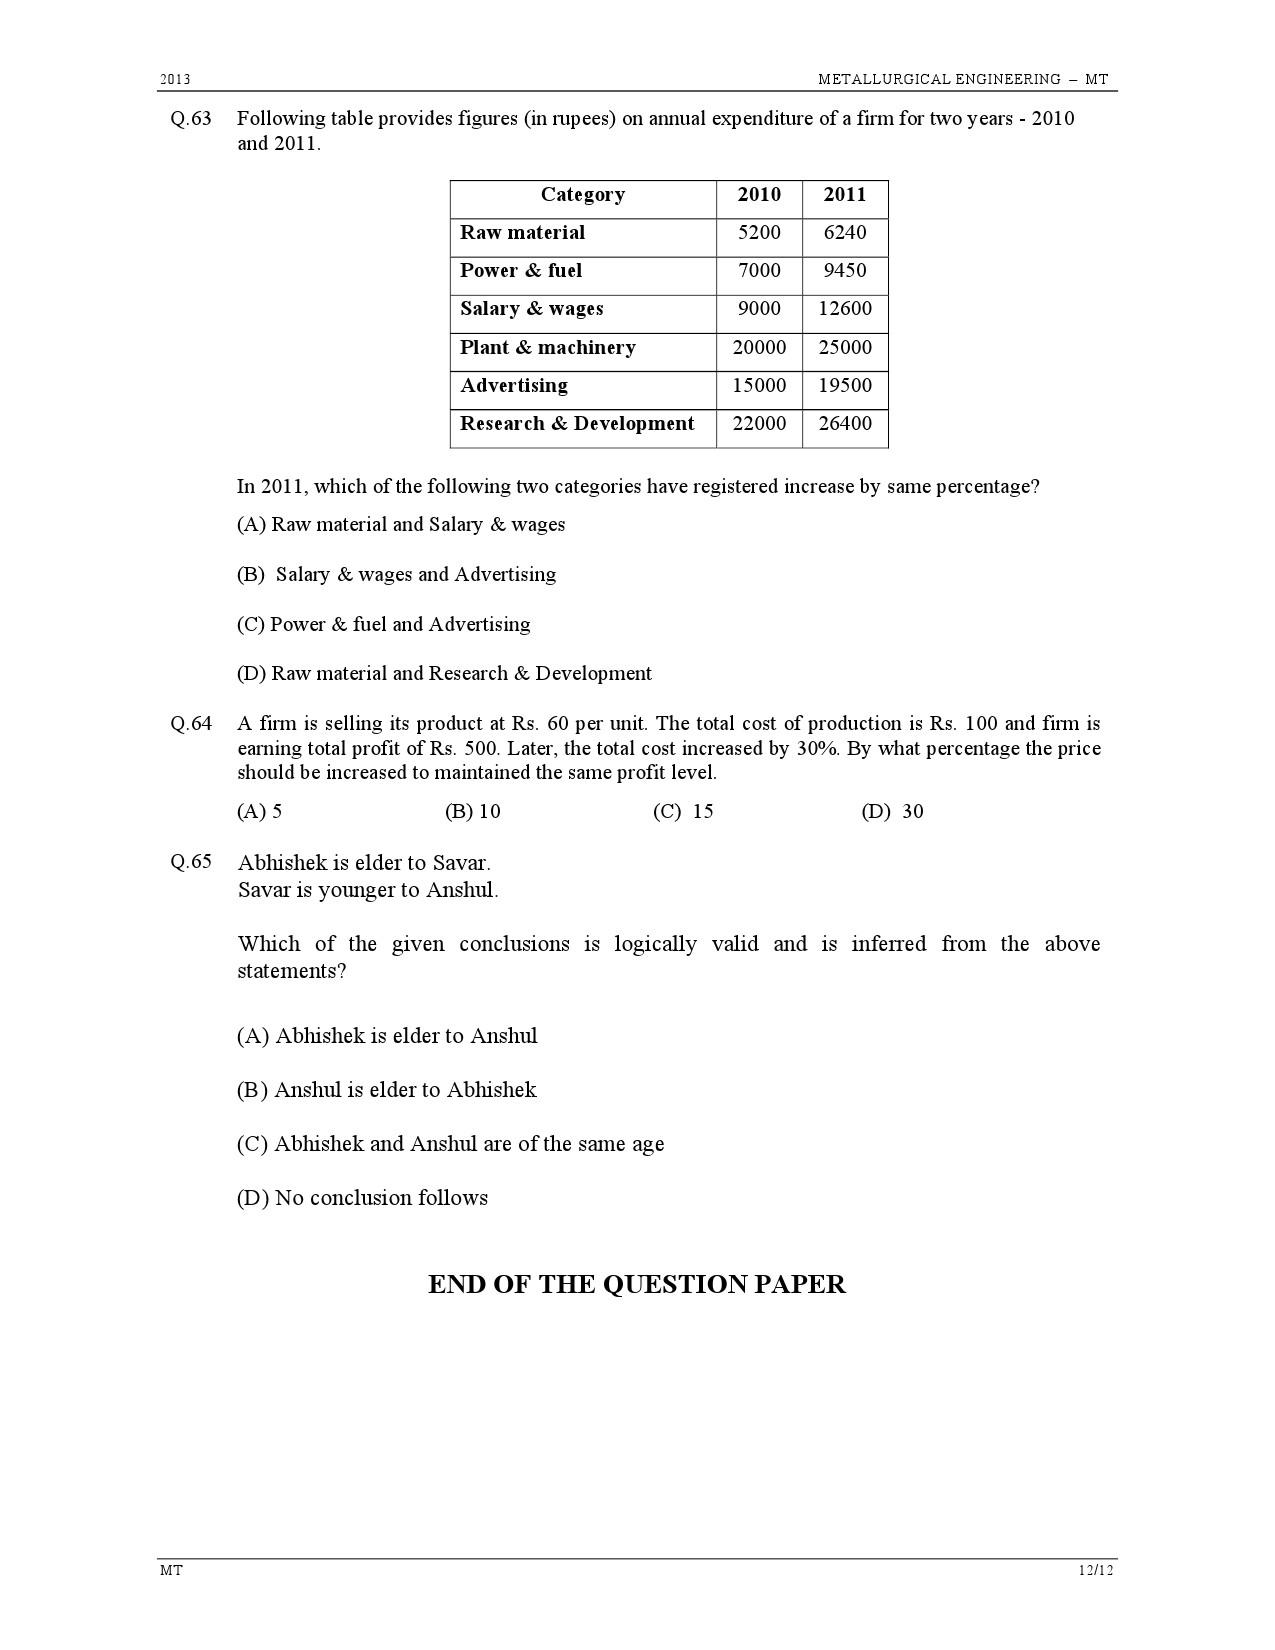 GATE Exam Question Paper 2013 Metallurgical Engineering 12